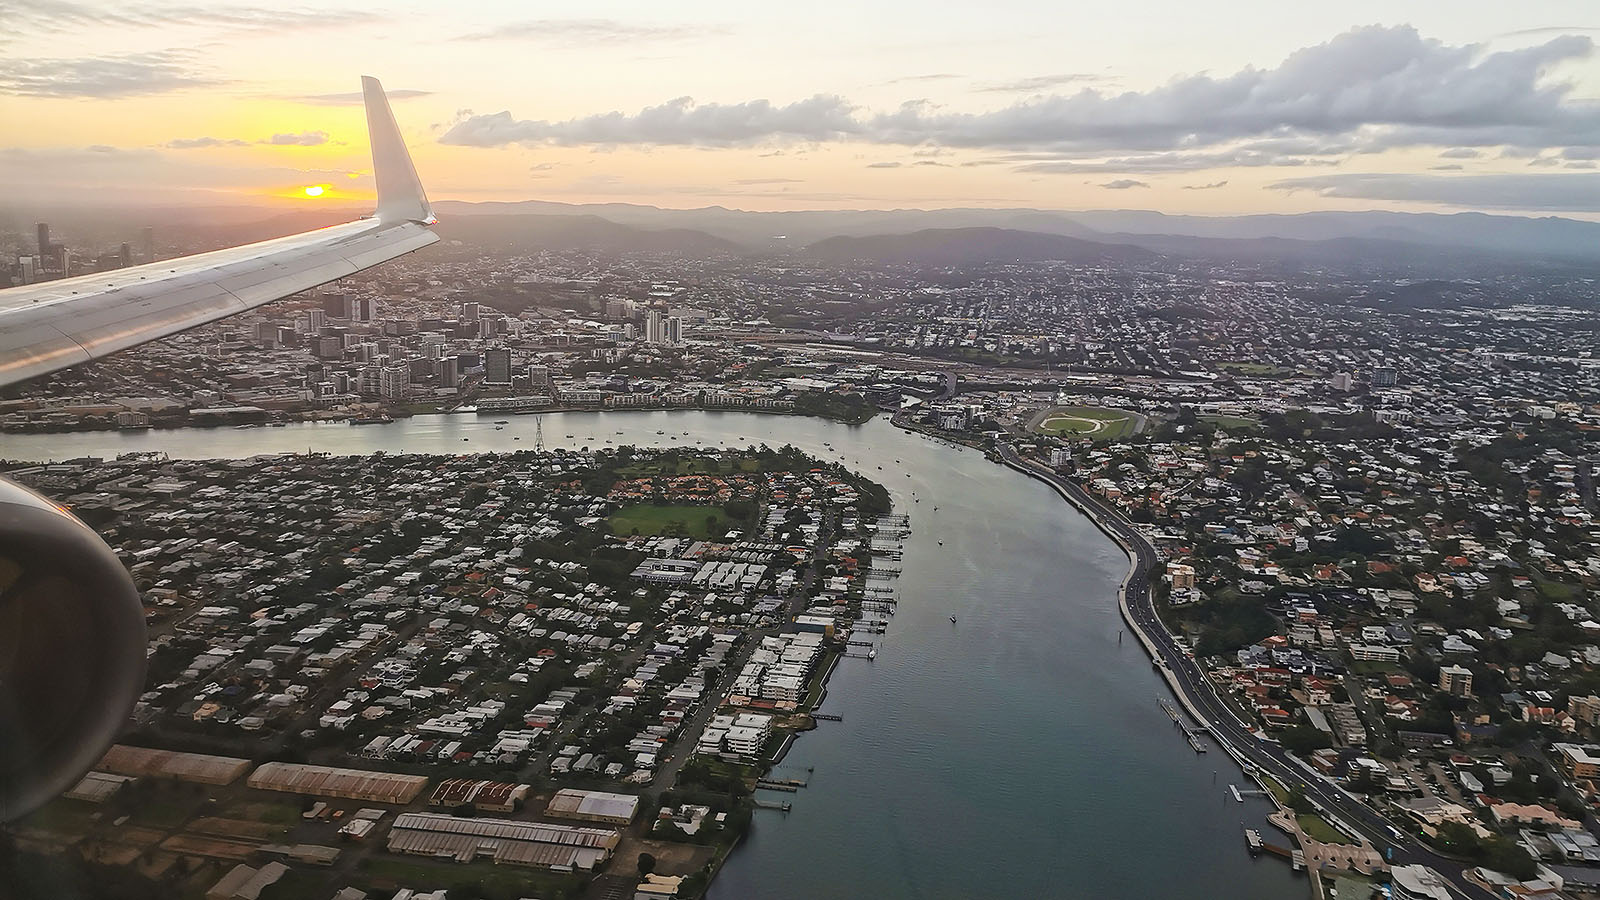 View of Brisbane from Qantas Boeing 737 Business